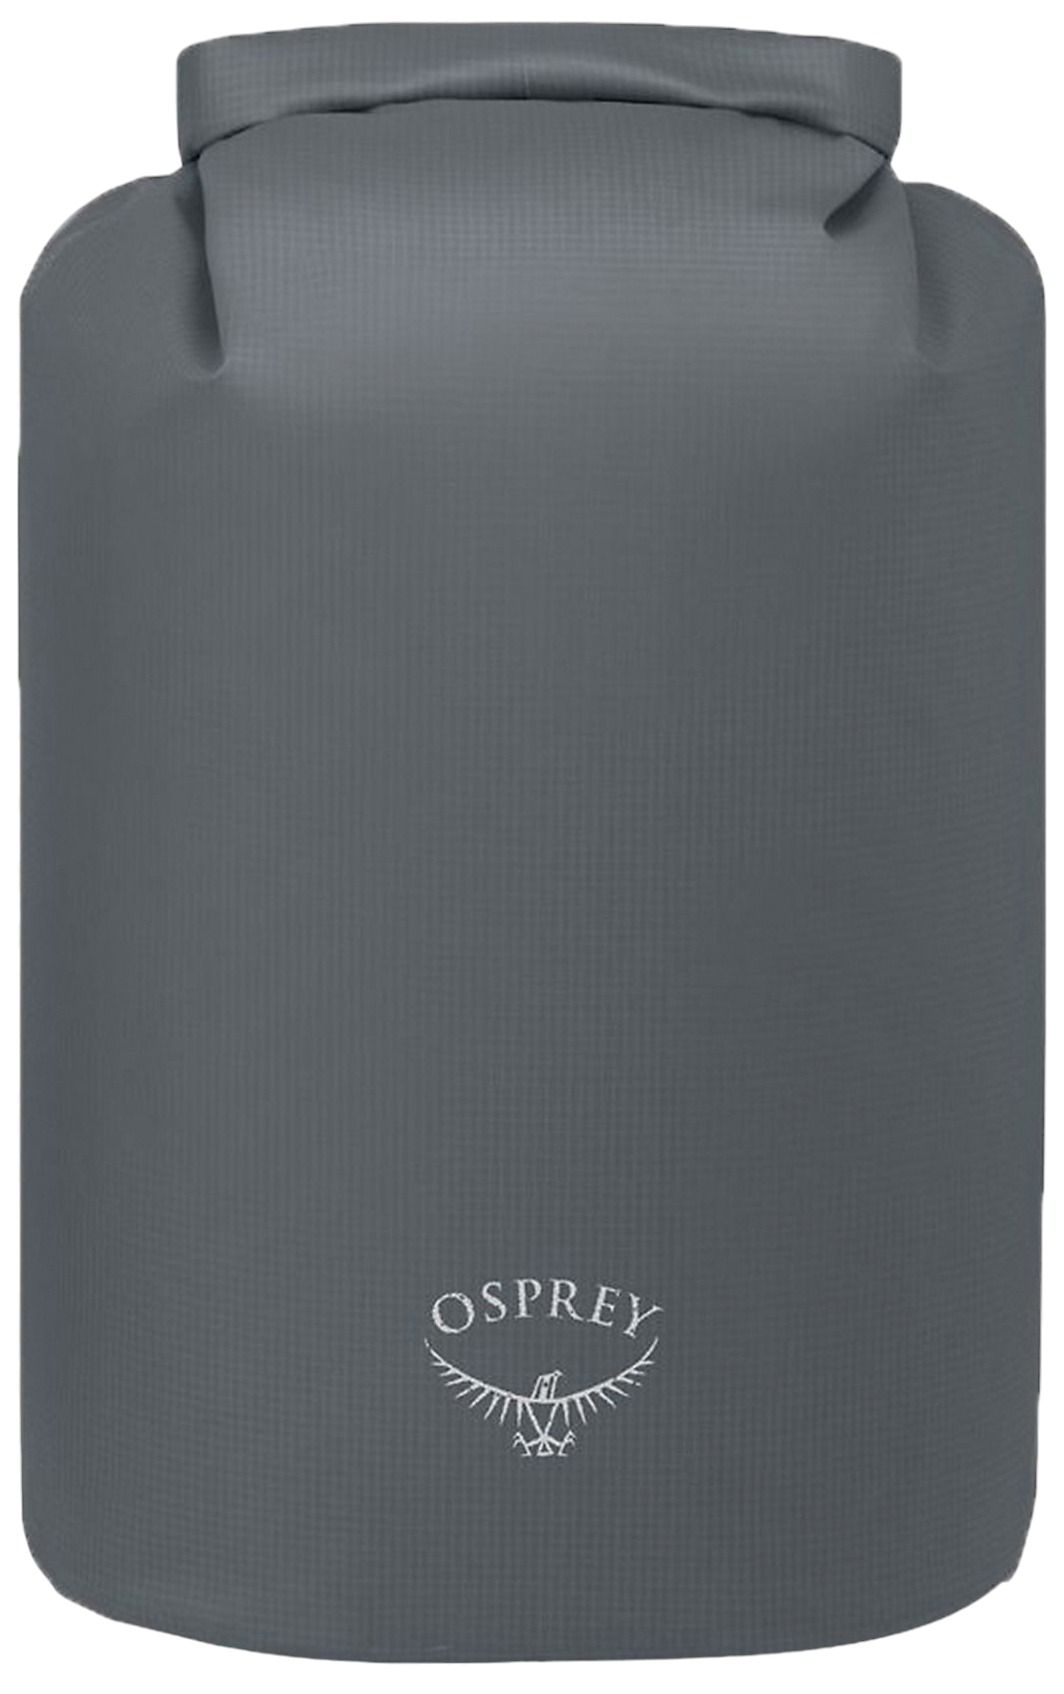 Photos - Outdoor Furniture Osprey Wildwater 50 Dry Bag, Tunnel Vision Grey 23TRYUWLDWTR50DRYCAC 